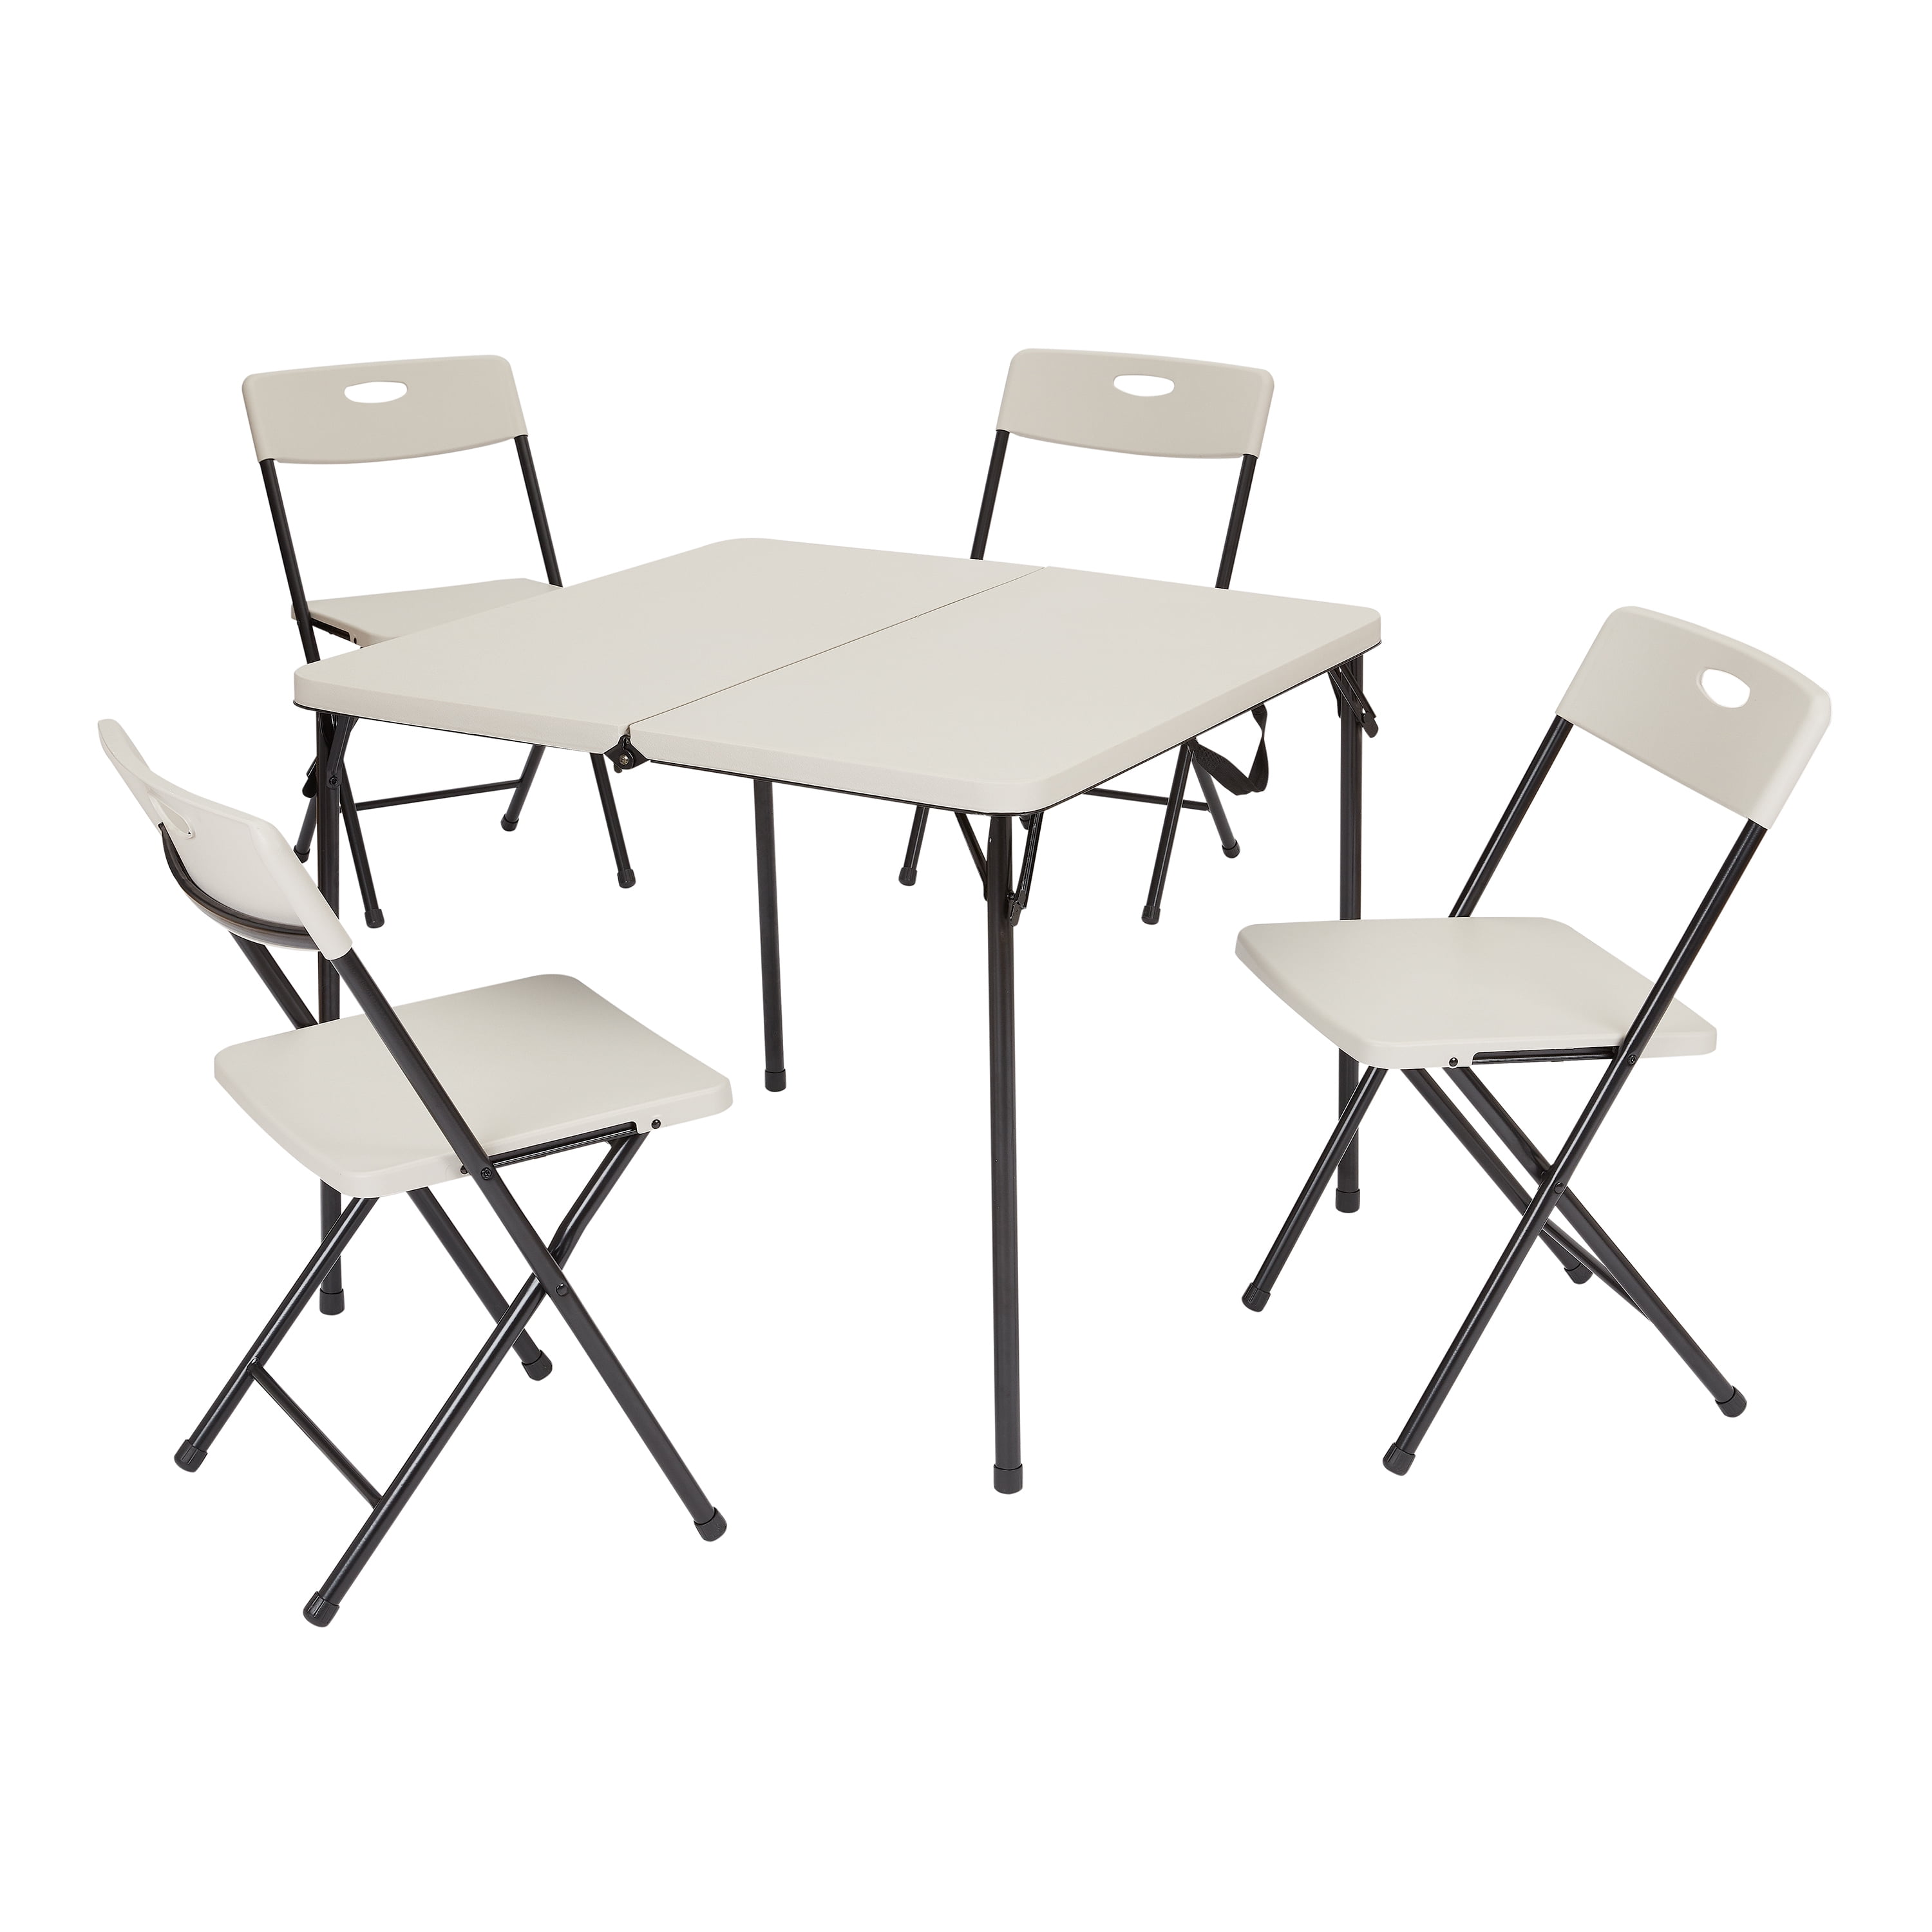 Latest Walmart Table And Chairs Set Information